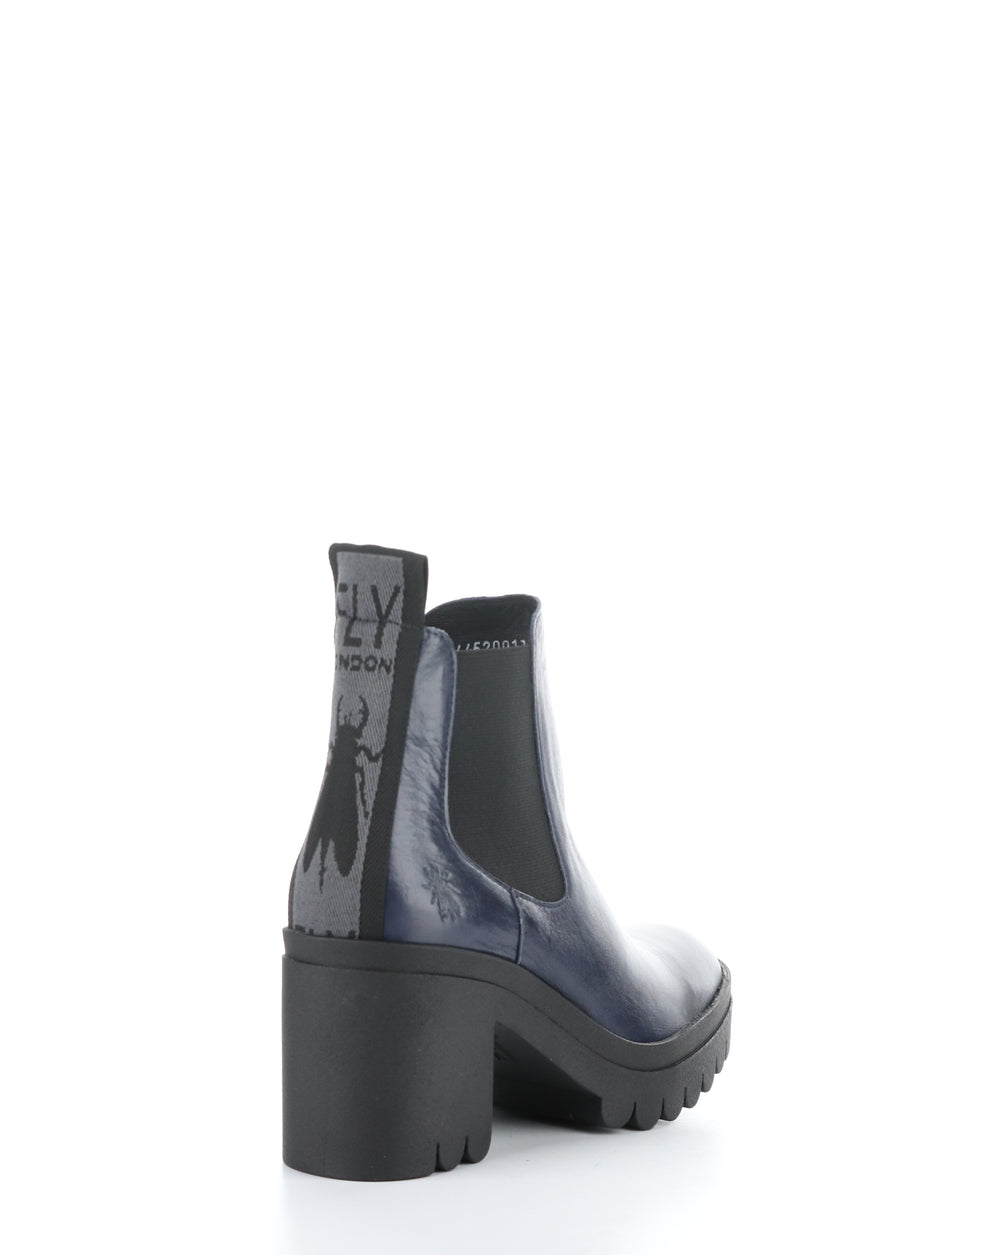 TOPE520FLY 017 NAVY Elasticated Boots